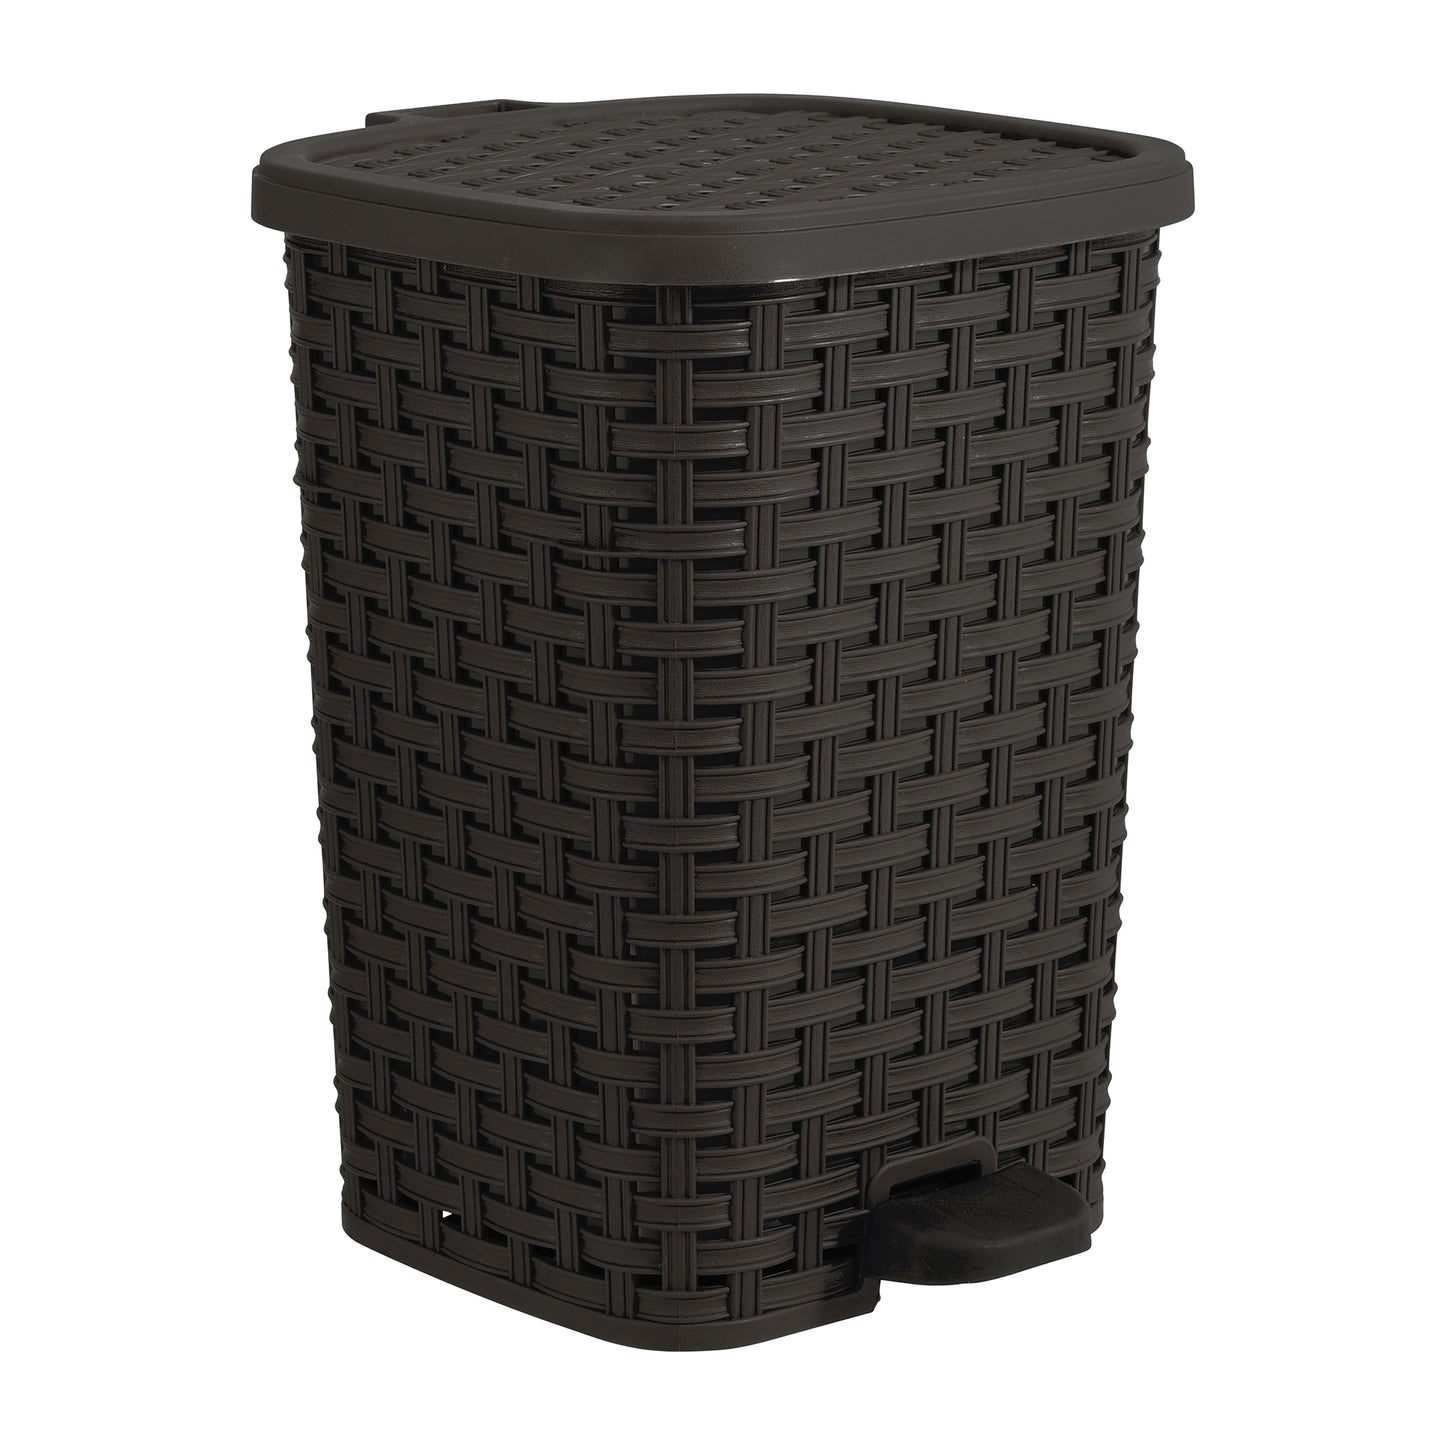 Step-On Trash Can, Wicker Style - New Brown 12 qt